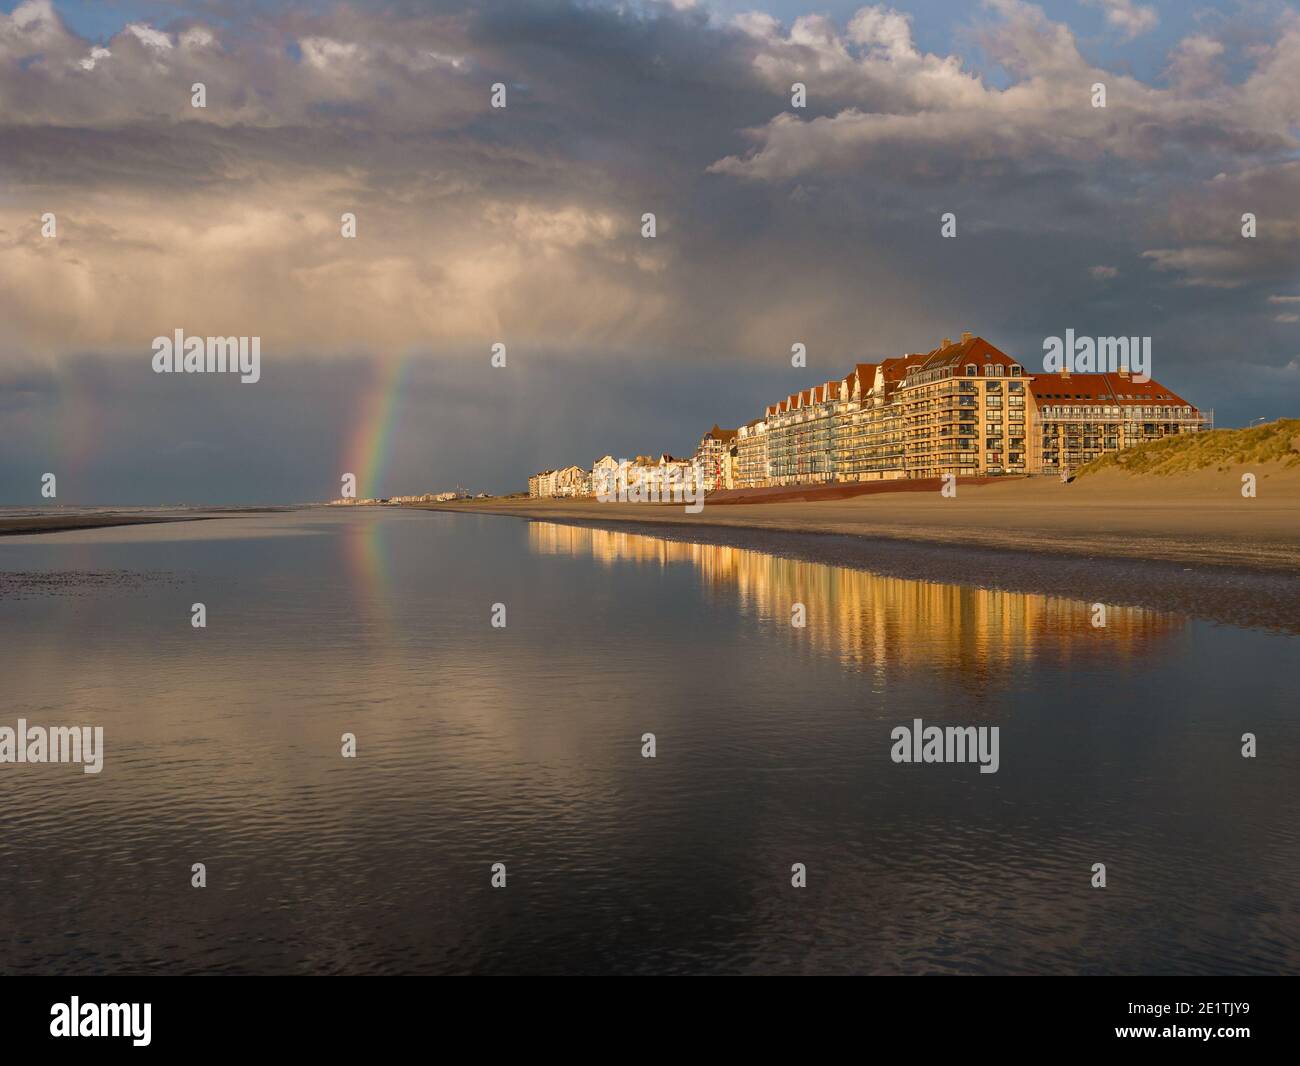 Colorful rainbow at the beach under dramatic sky Stock Photo